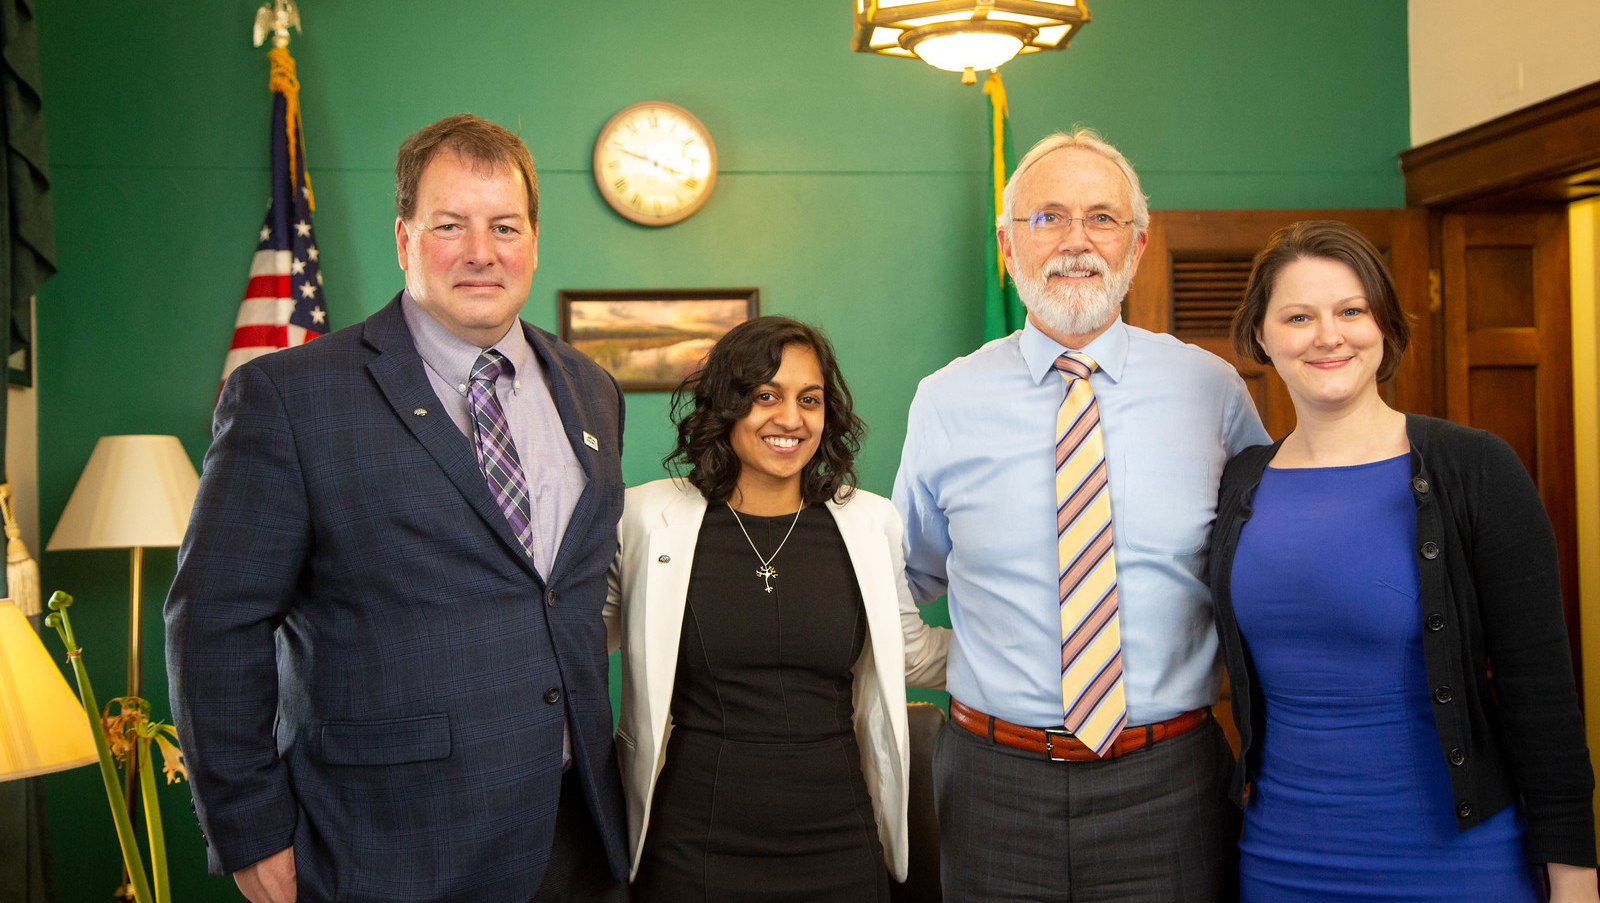 SfN advocates Ed Bilsky, 2019 Early Career Policy Ambassador Priyanka Bushana, and Mollie Marr wrap up a successful meeting with Rep. Dan Newhouse (R-WA) (second from right).